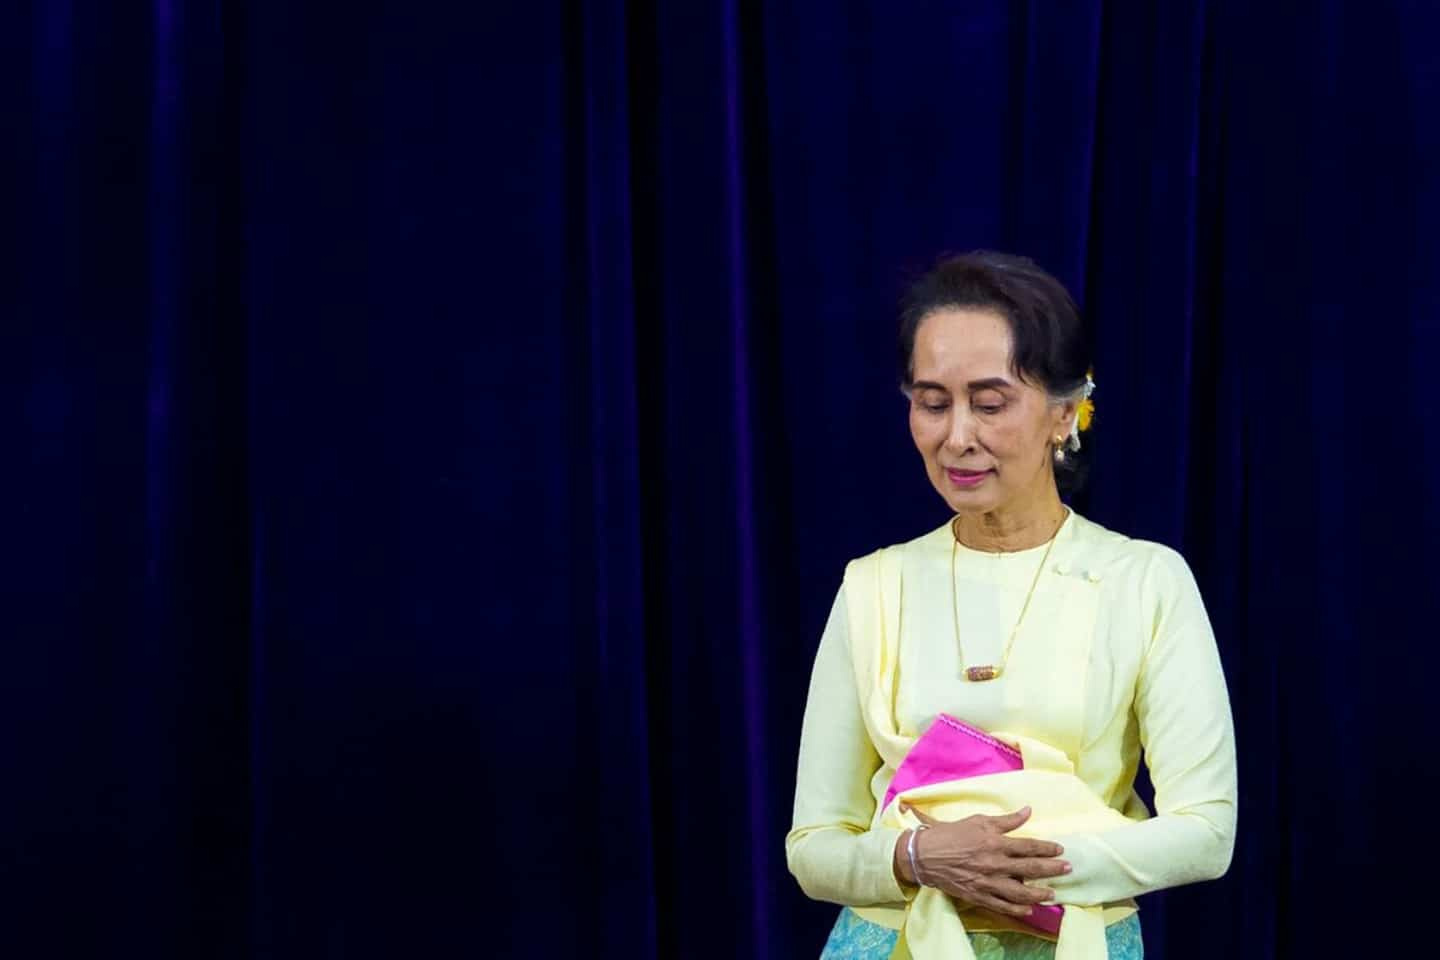 Burma: total of 33 years in prison for Aung San Suu Kyi, again sentenced for corruption